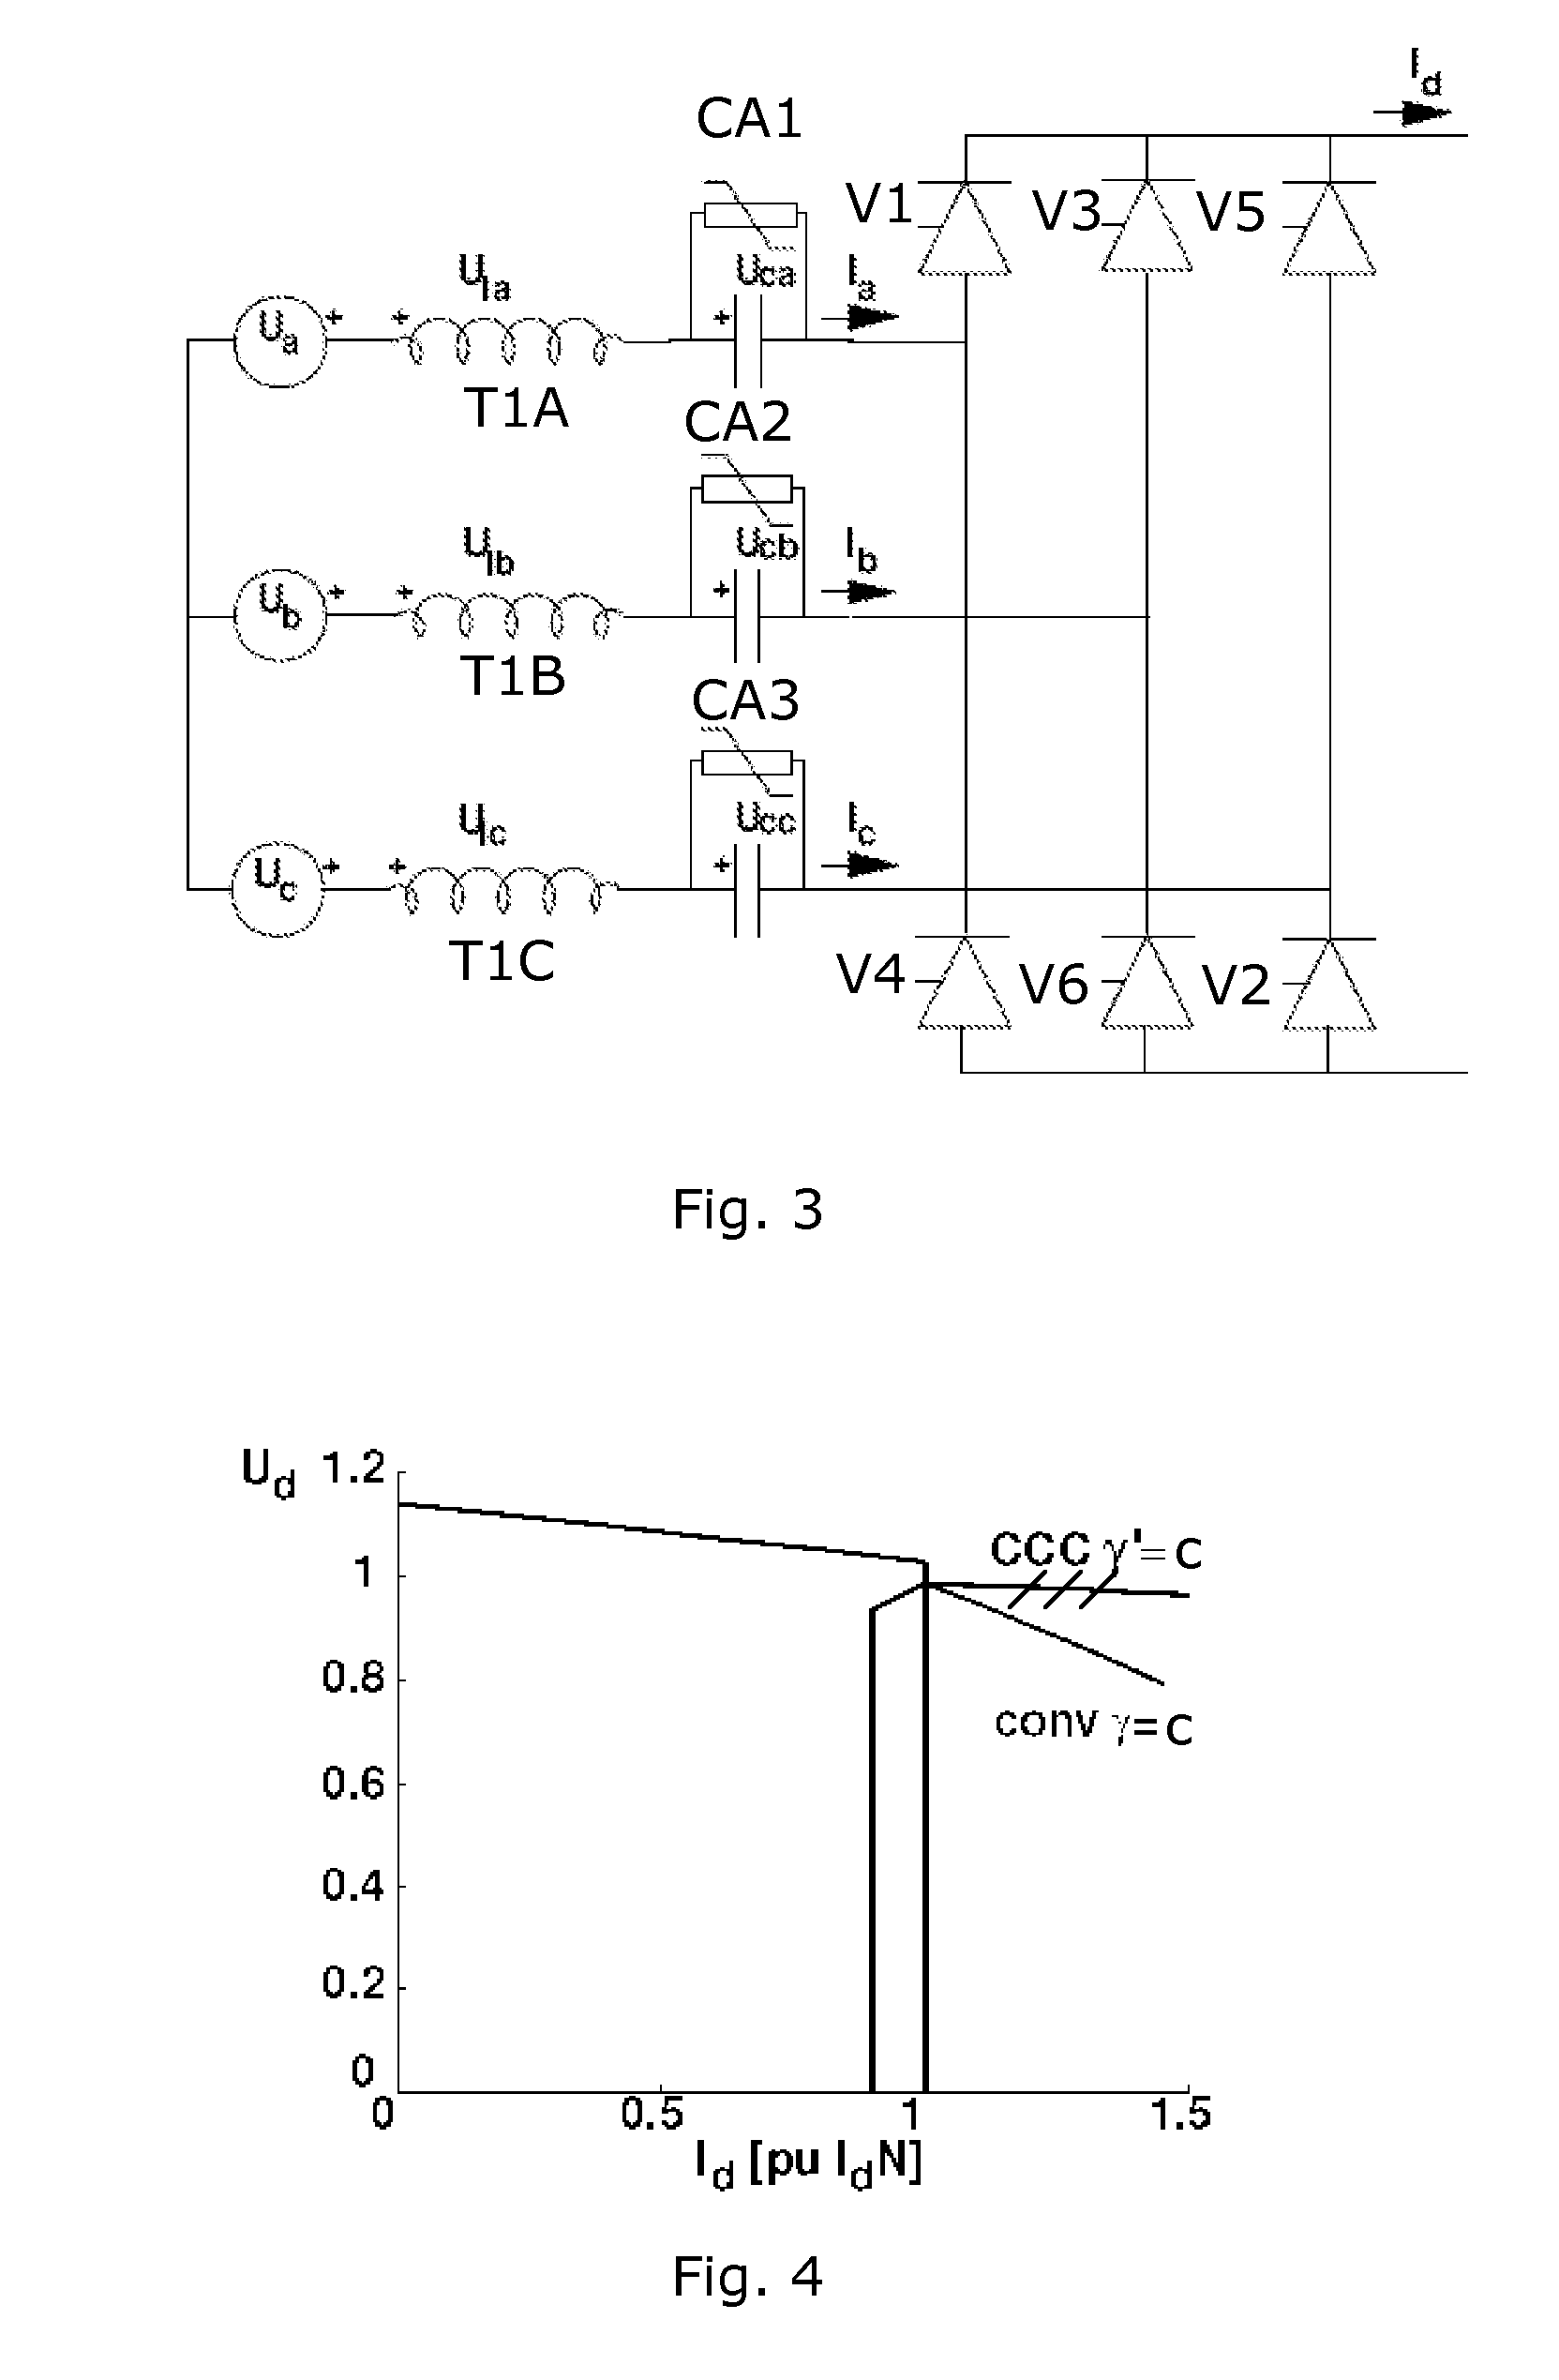 Controlling an inverter device of a high voltage DC system for supporting an ac system